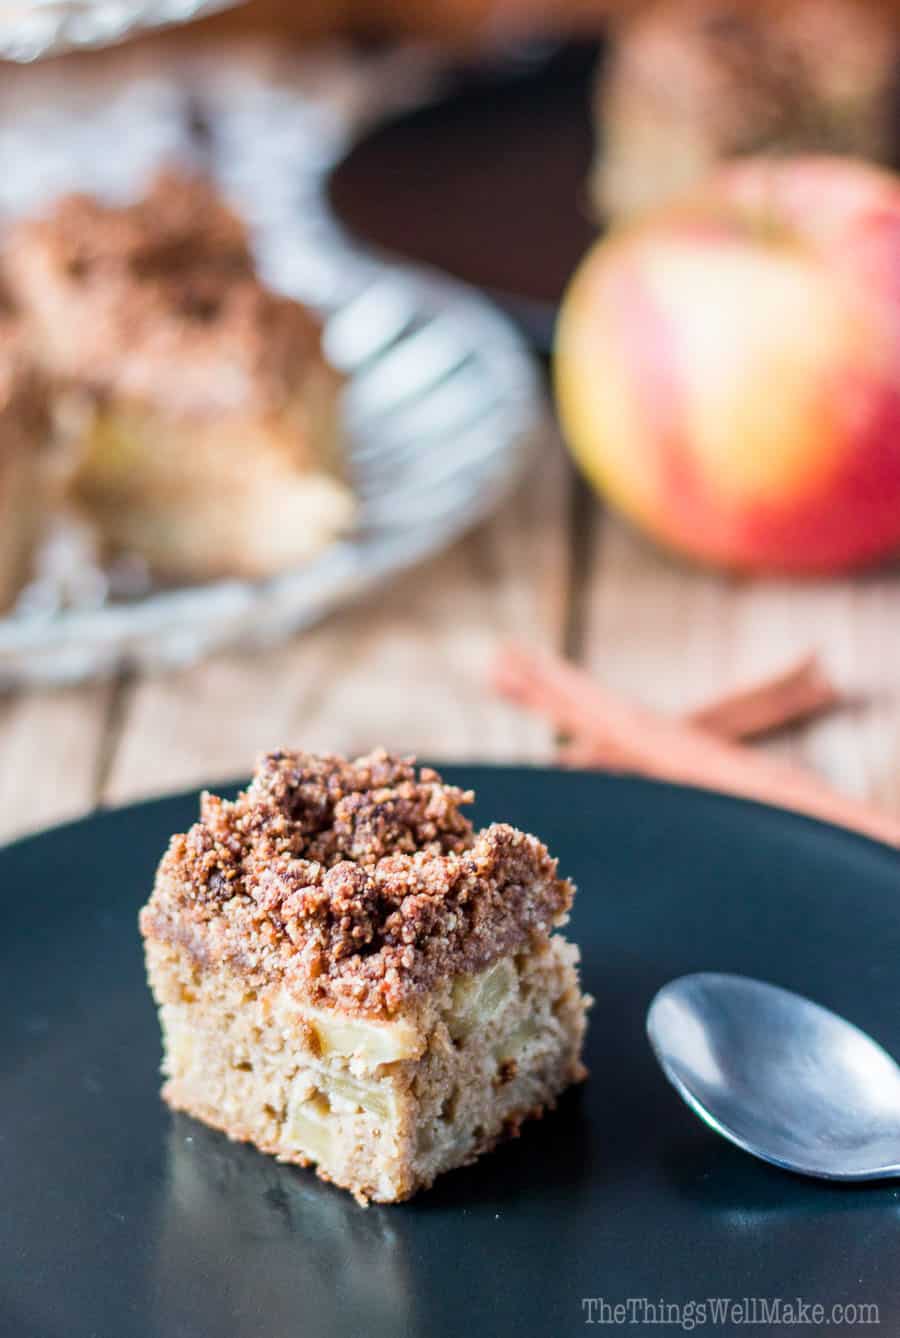 With fall apples giving this coffee cake its moist texture, which contrasts with its crispy crumb topping, this paleo apple crumb cake is definitely one of my favorite paleo treats. 